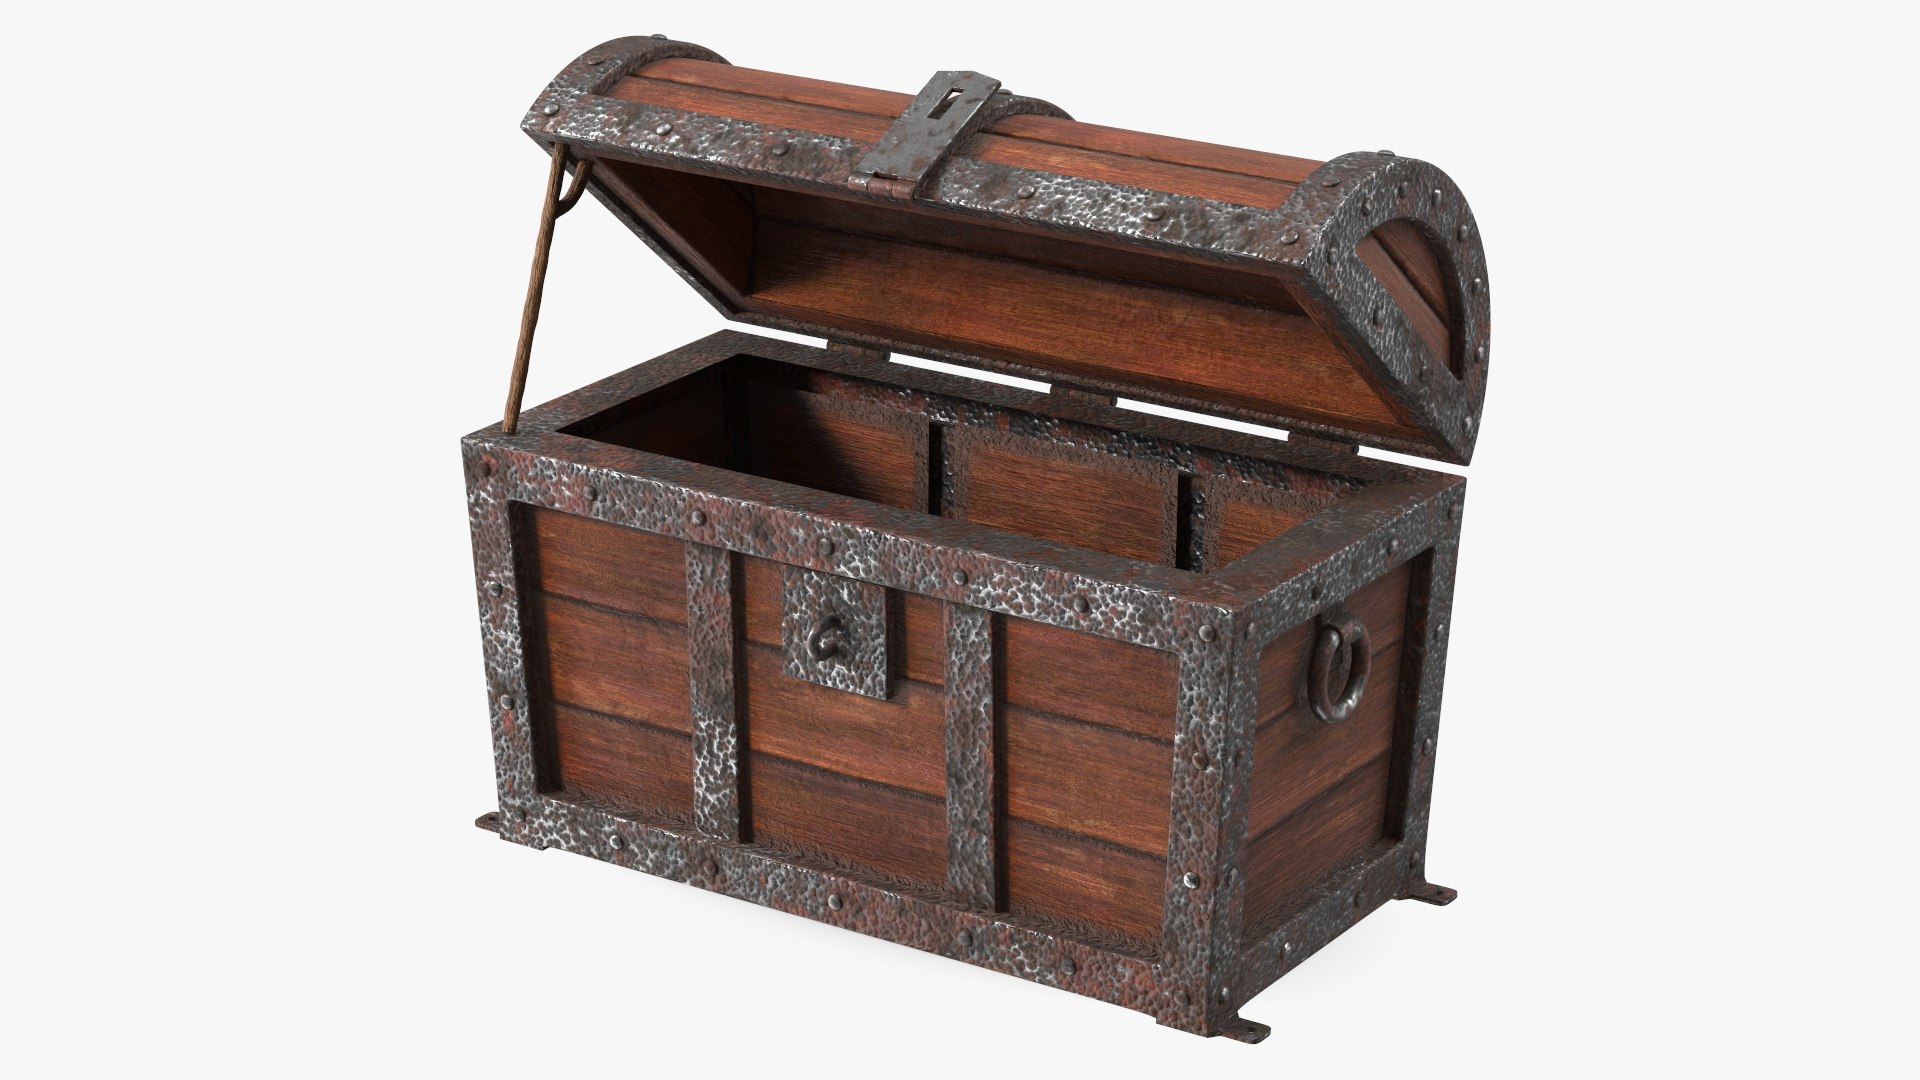 Medieval Treasure Chest - Wooden Chest VII, 3D Props